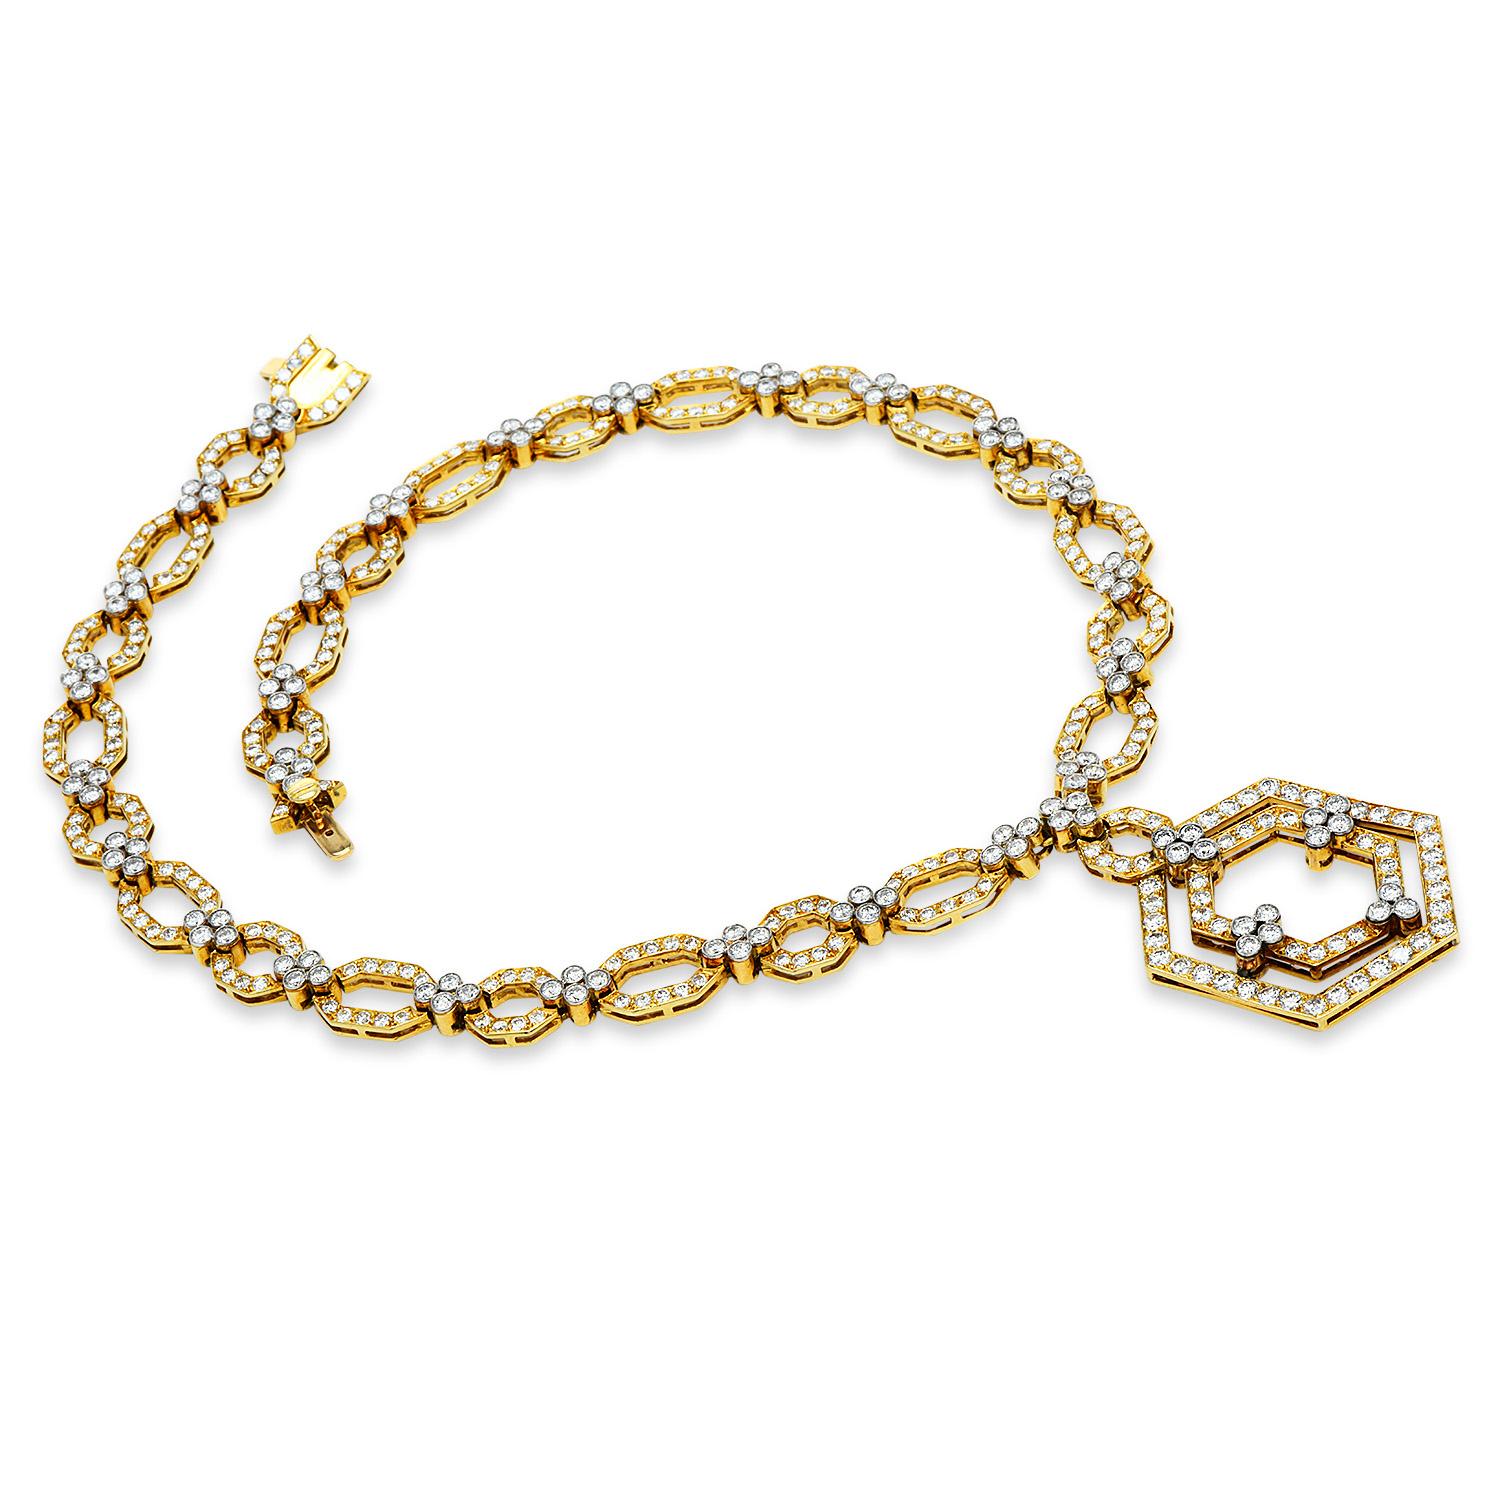 Geometrical 1980's vintage beauty! This statement piece is crafted in solid 18K Yellow gold with white gold accents. The Hexagon shape has been uplifted to another level with this exquisite piece. 
cluster diamonds accented links, unite the multiple